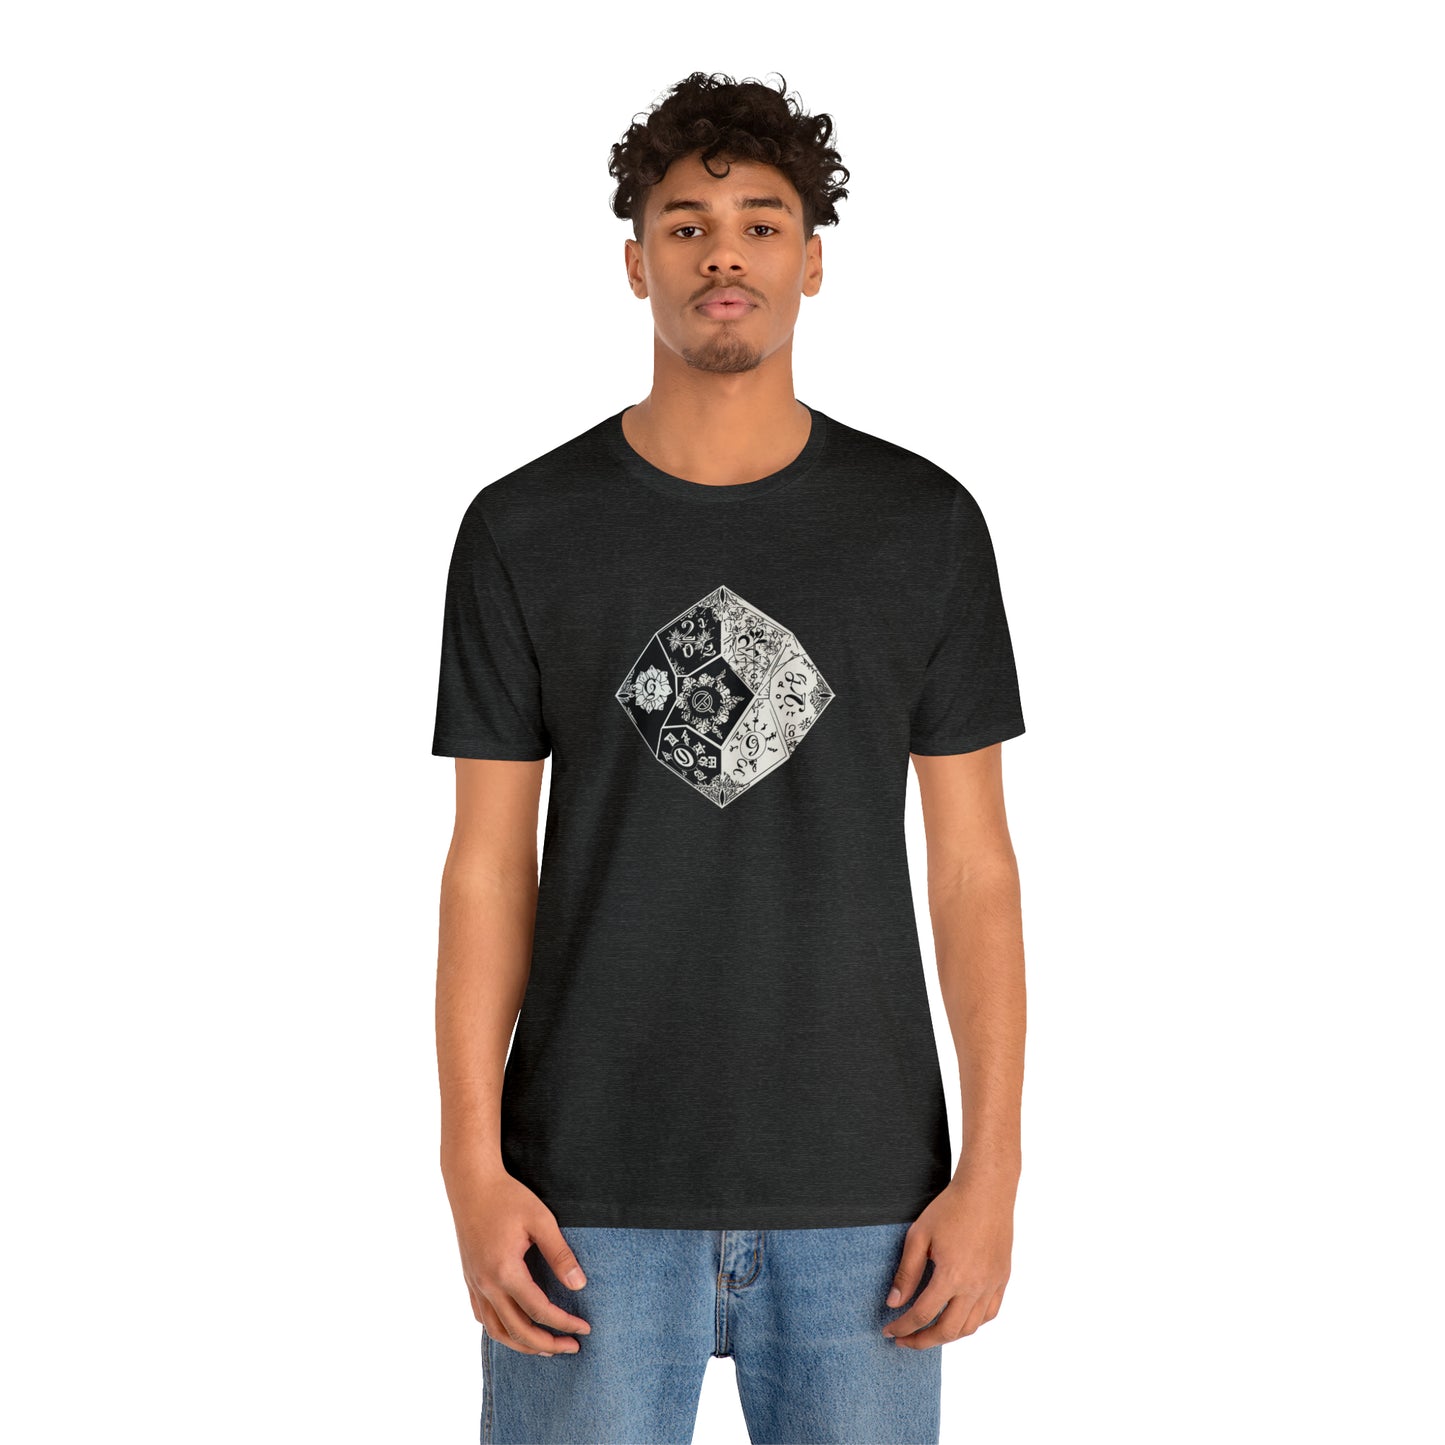 dark-grey-heather-quest-thread-tee-shirt-with-large-black-and-white-artistic-dice-on-center